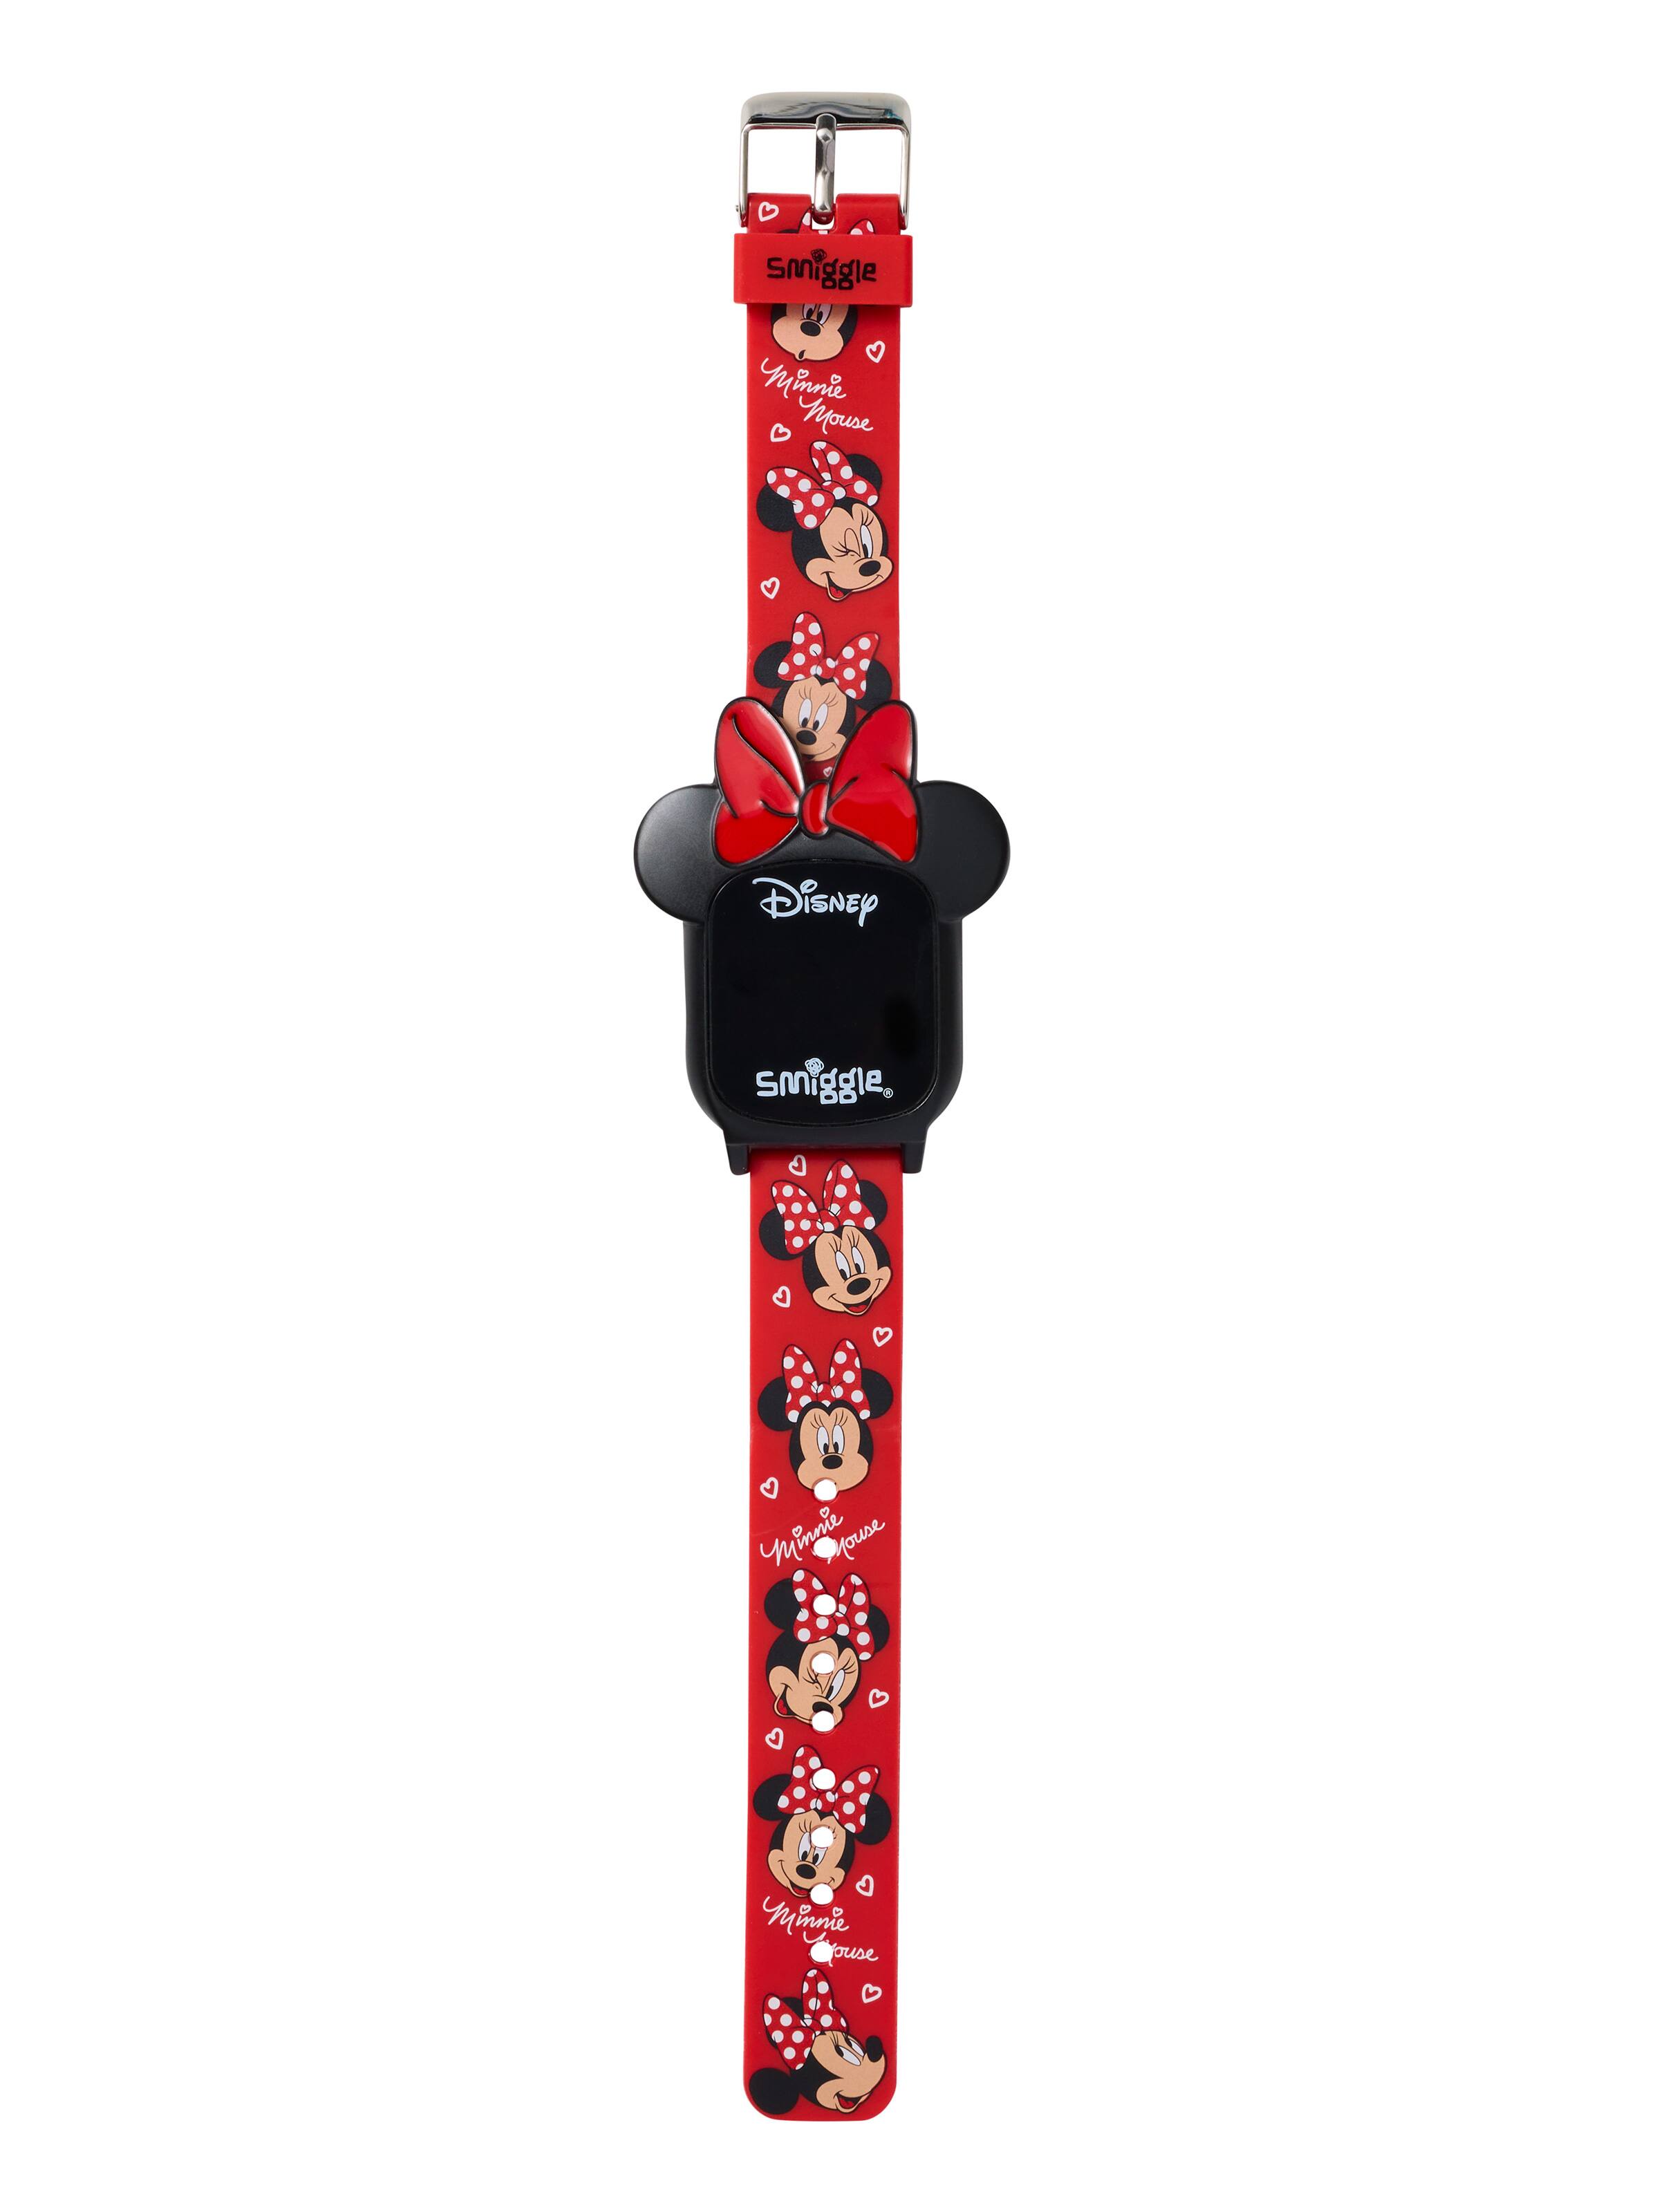 Disney Minnie Mouse Bluetooth Earbuds with Charging Case- Bluetooth  Wireless Headset with Built-in Mic and 30 Hours of Playtime- Disneyland  Essentials and Disney Gifts for Women and Men of All Ages 